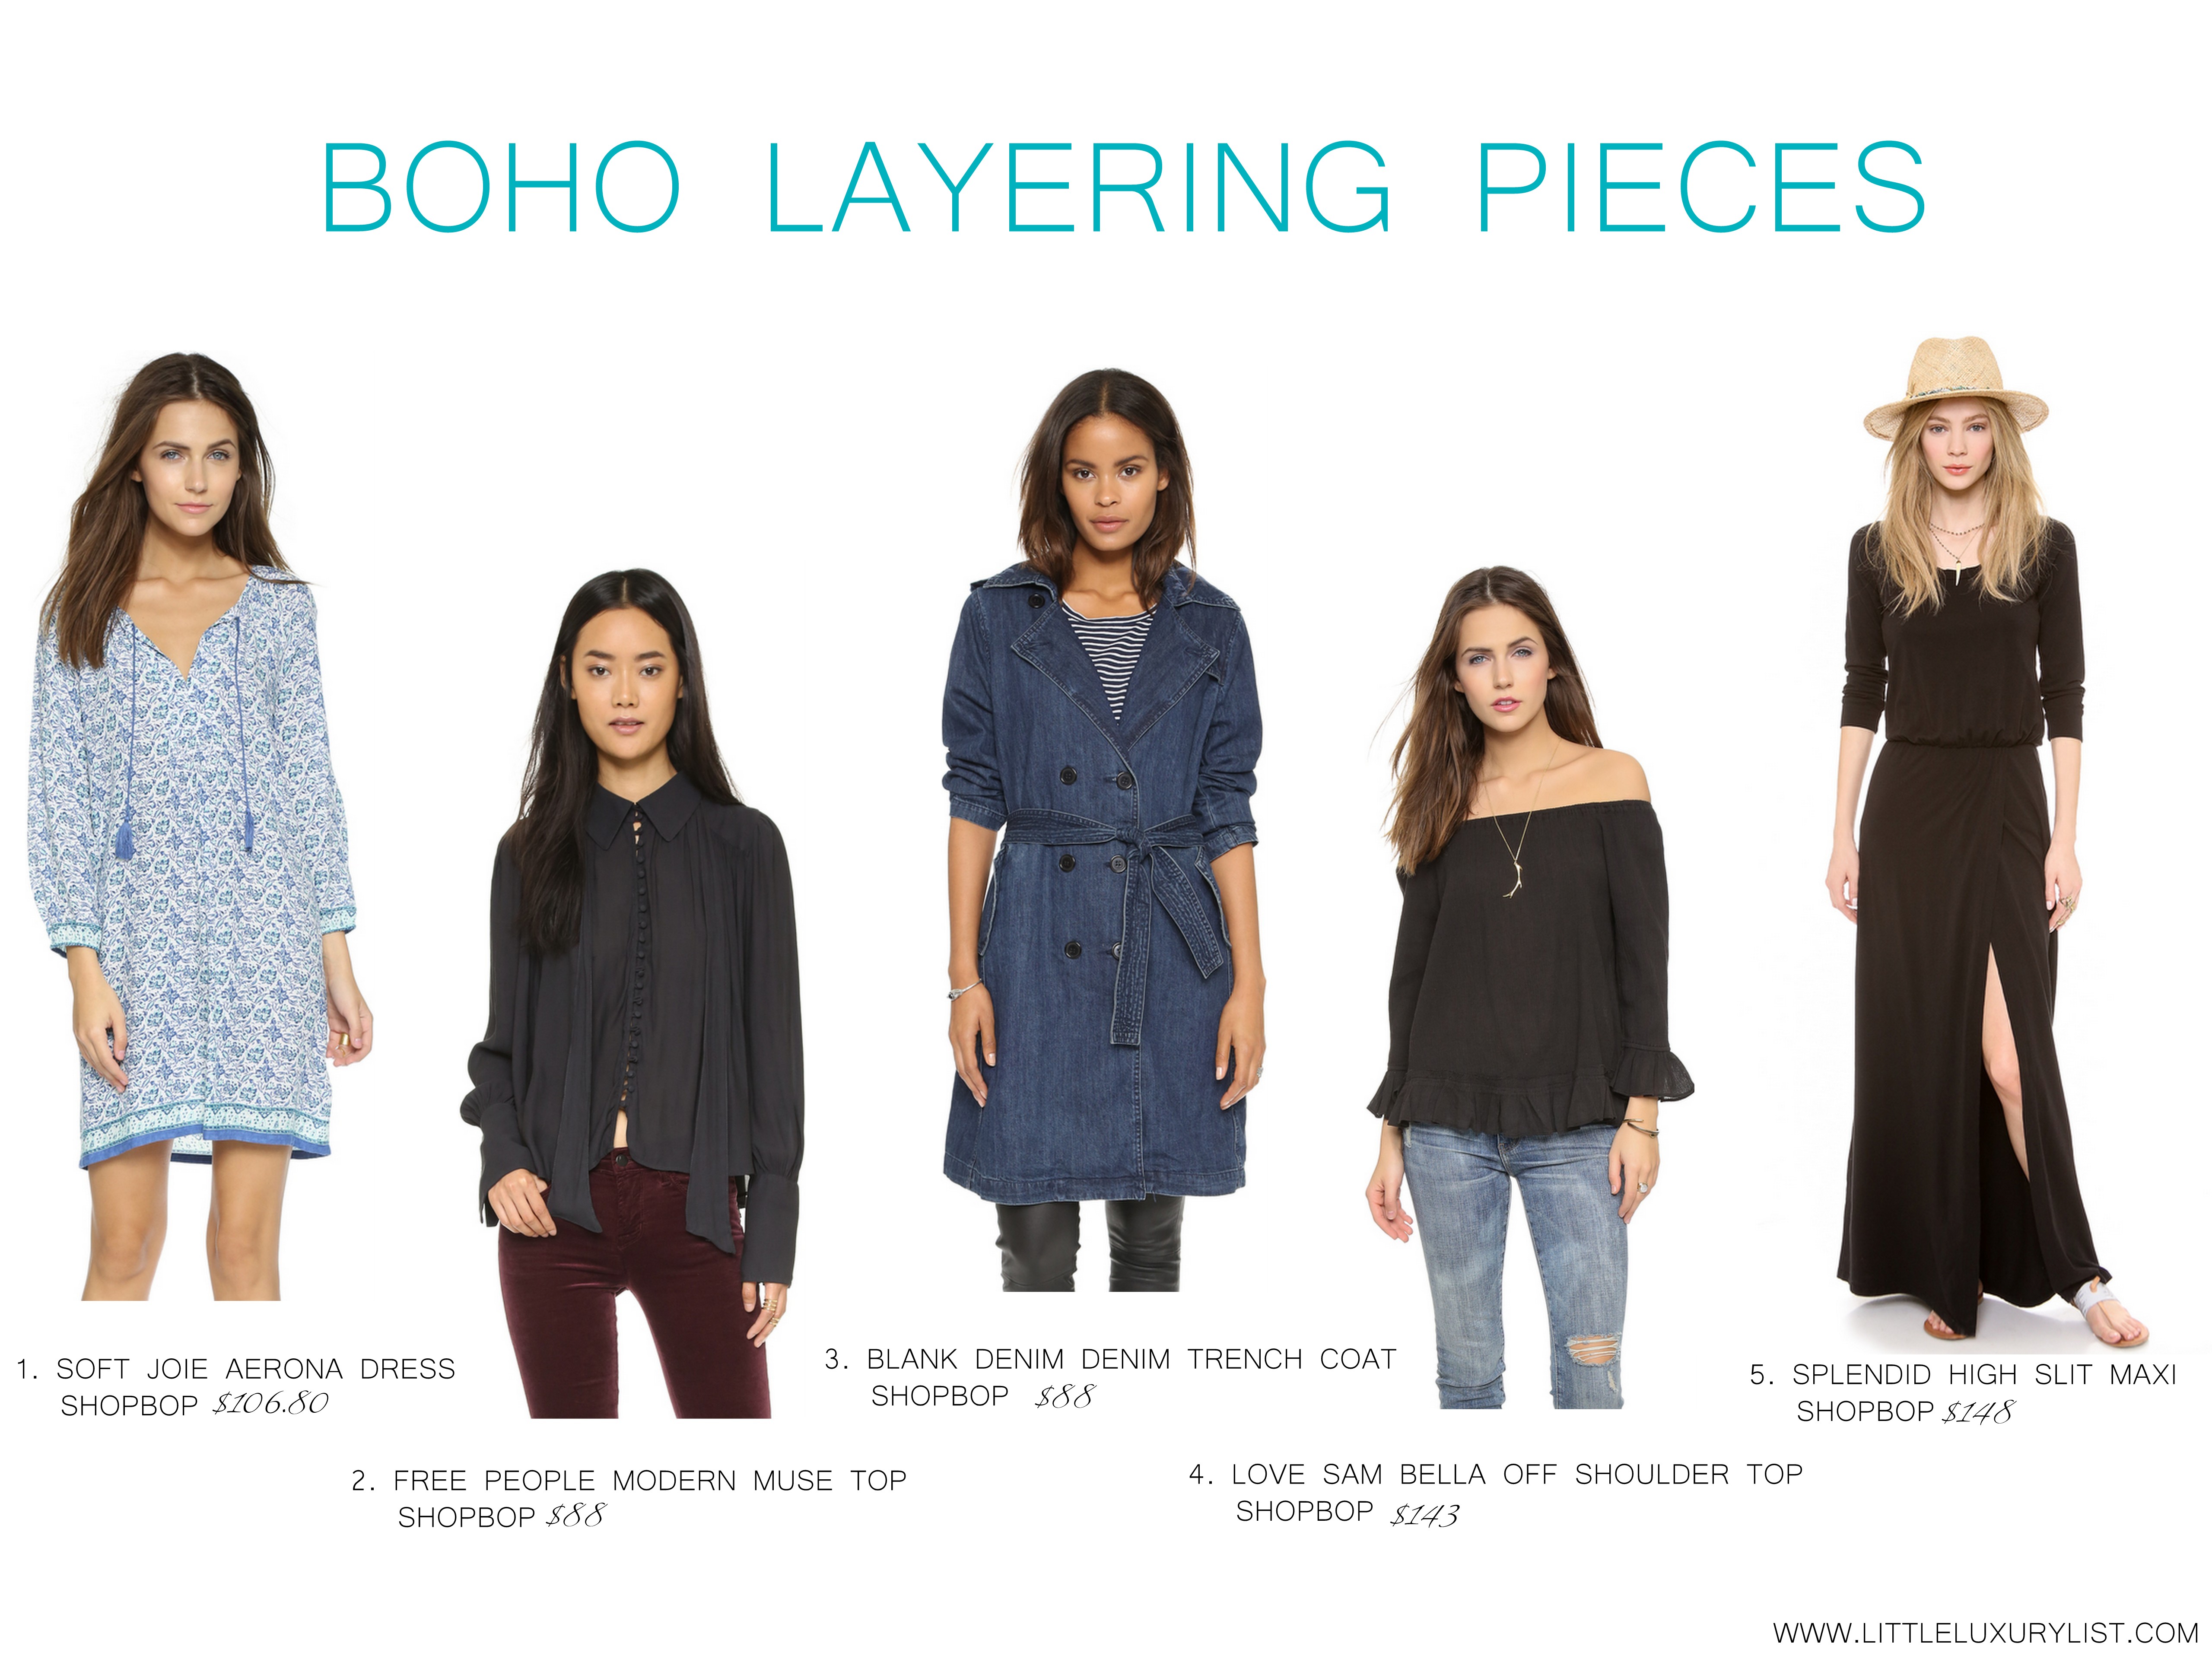 Boho layering pieces by little luxury list